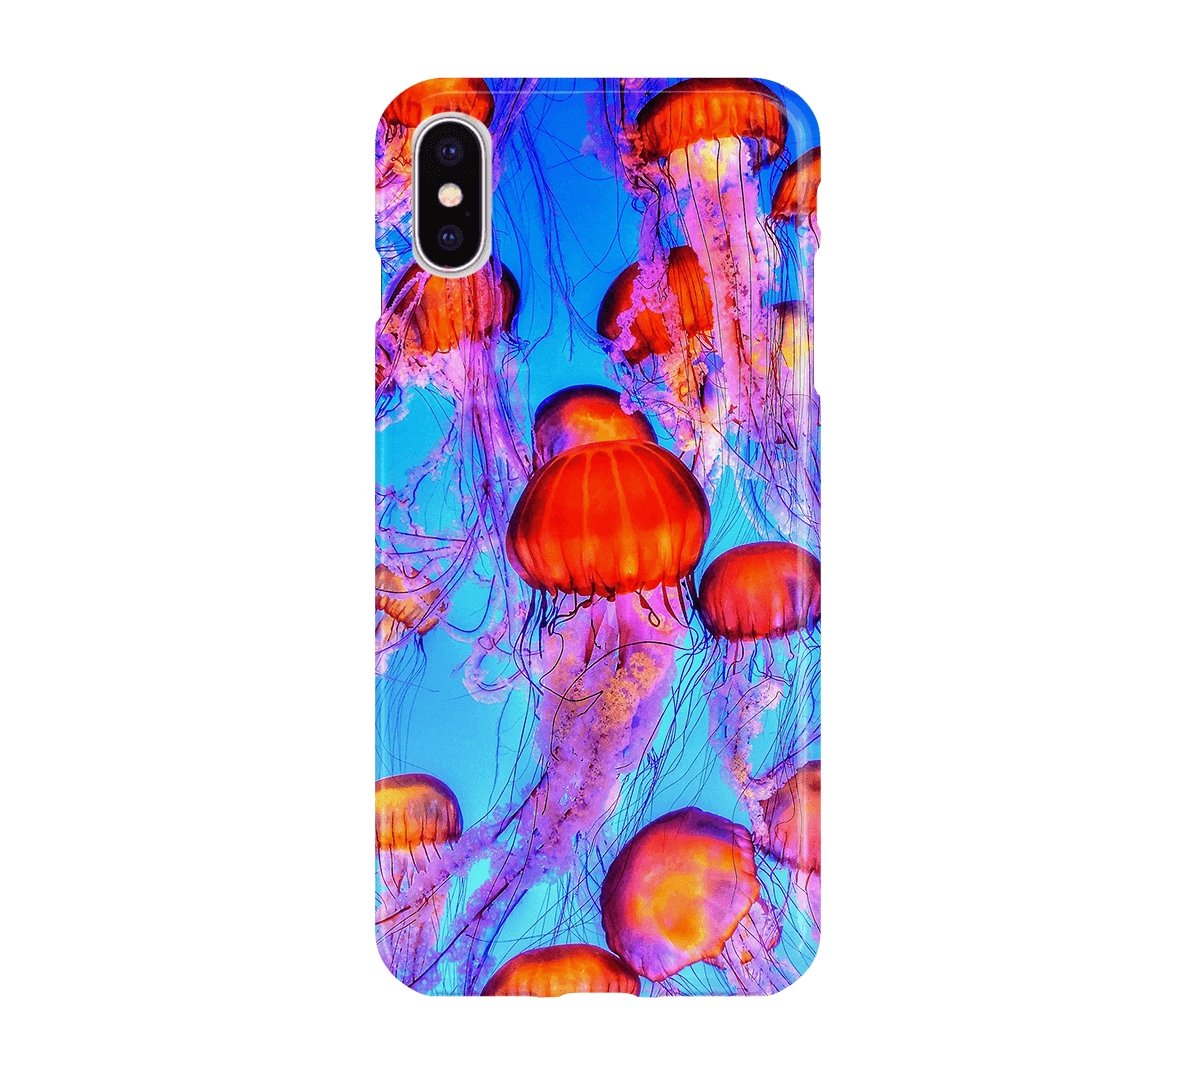 Jellyfish - iPhone phone case designs by CaseSwagger